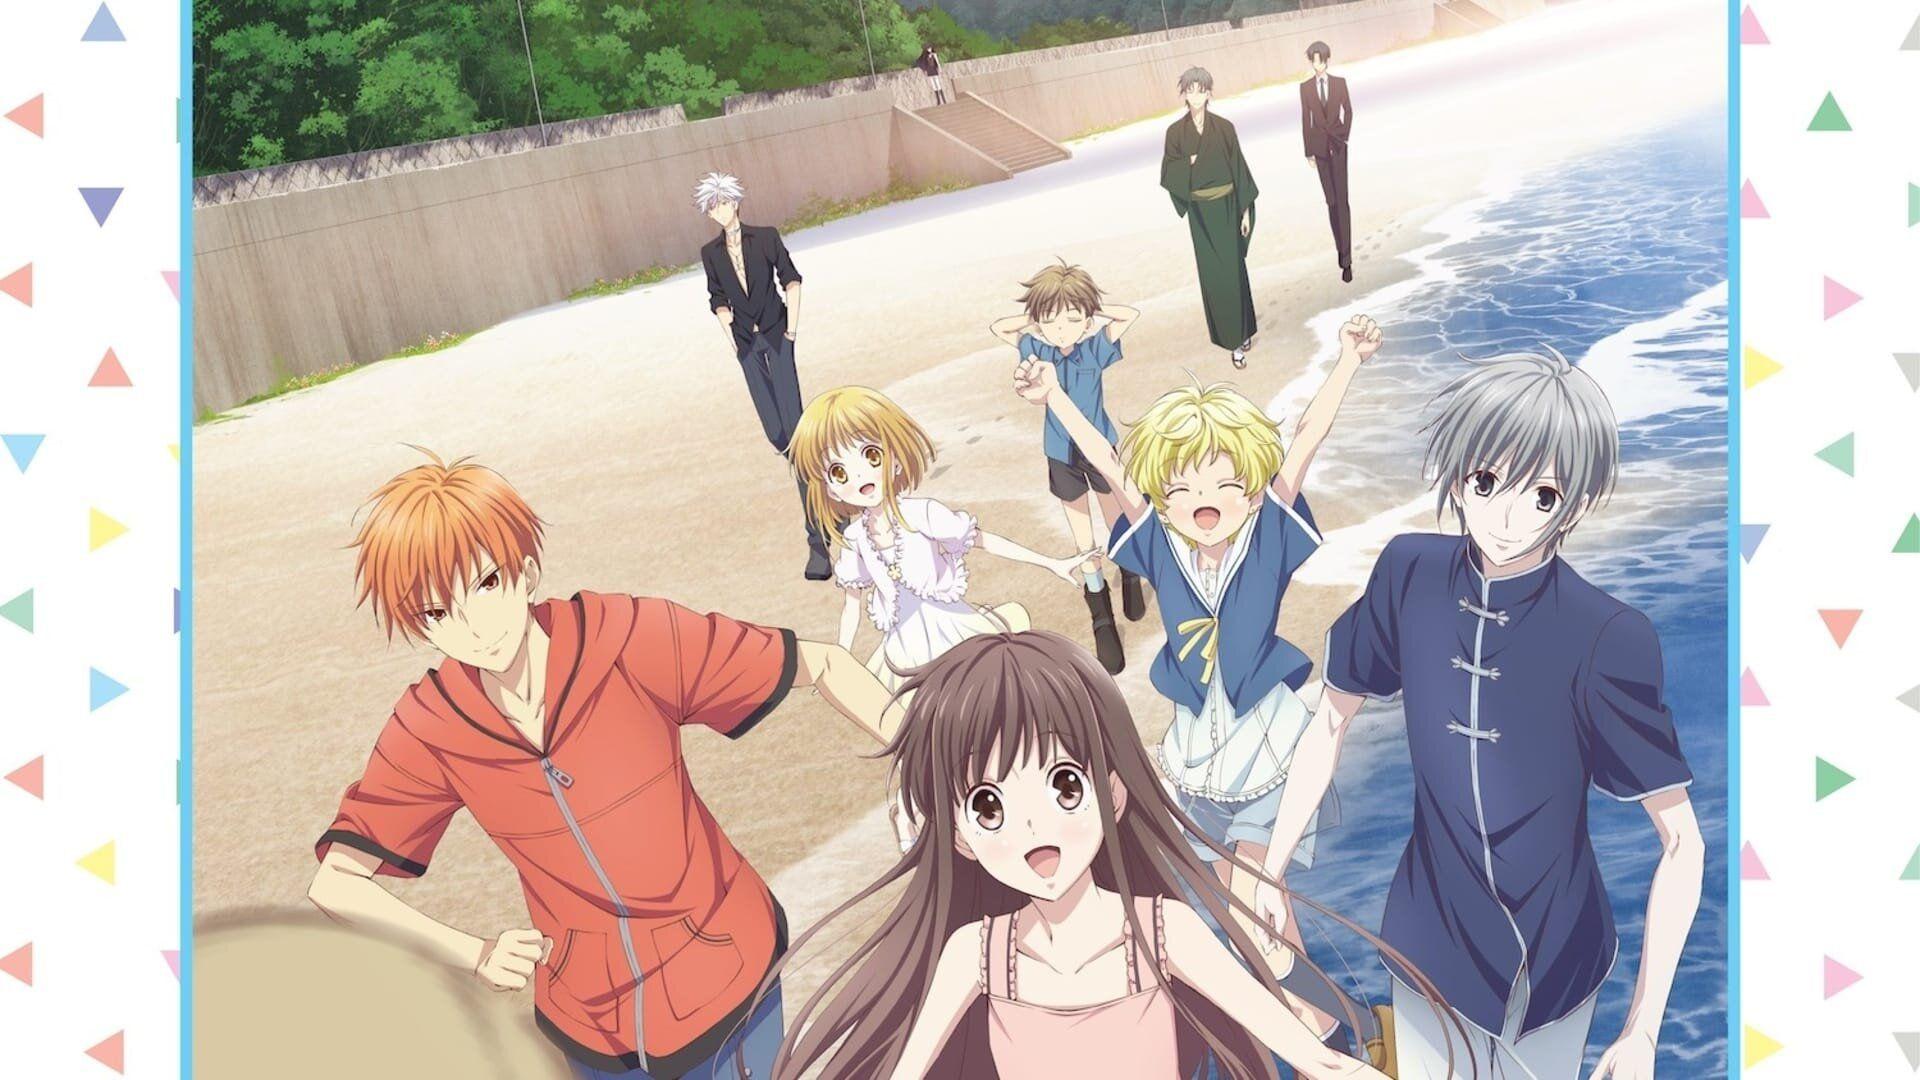 Fruits Basket | Canon Pairings from Anime Wiki | Fandom